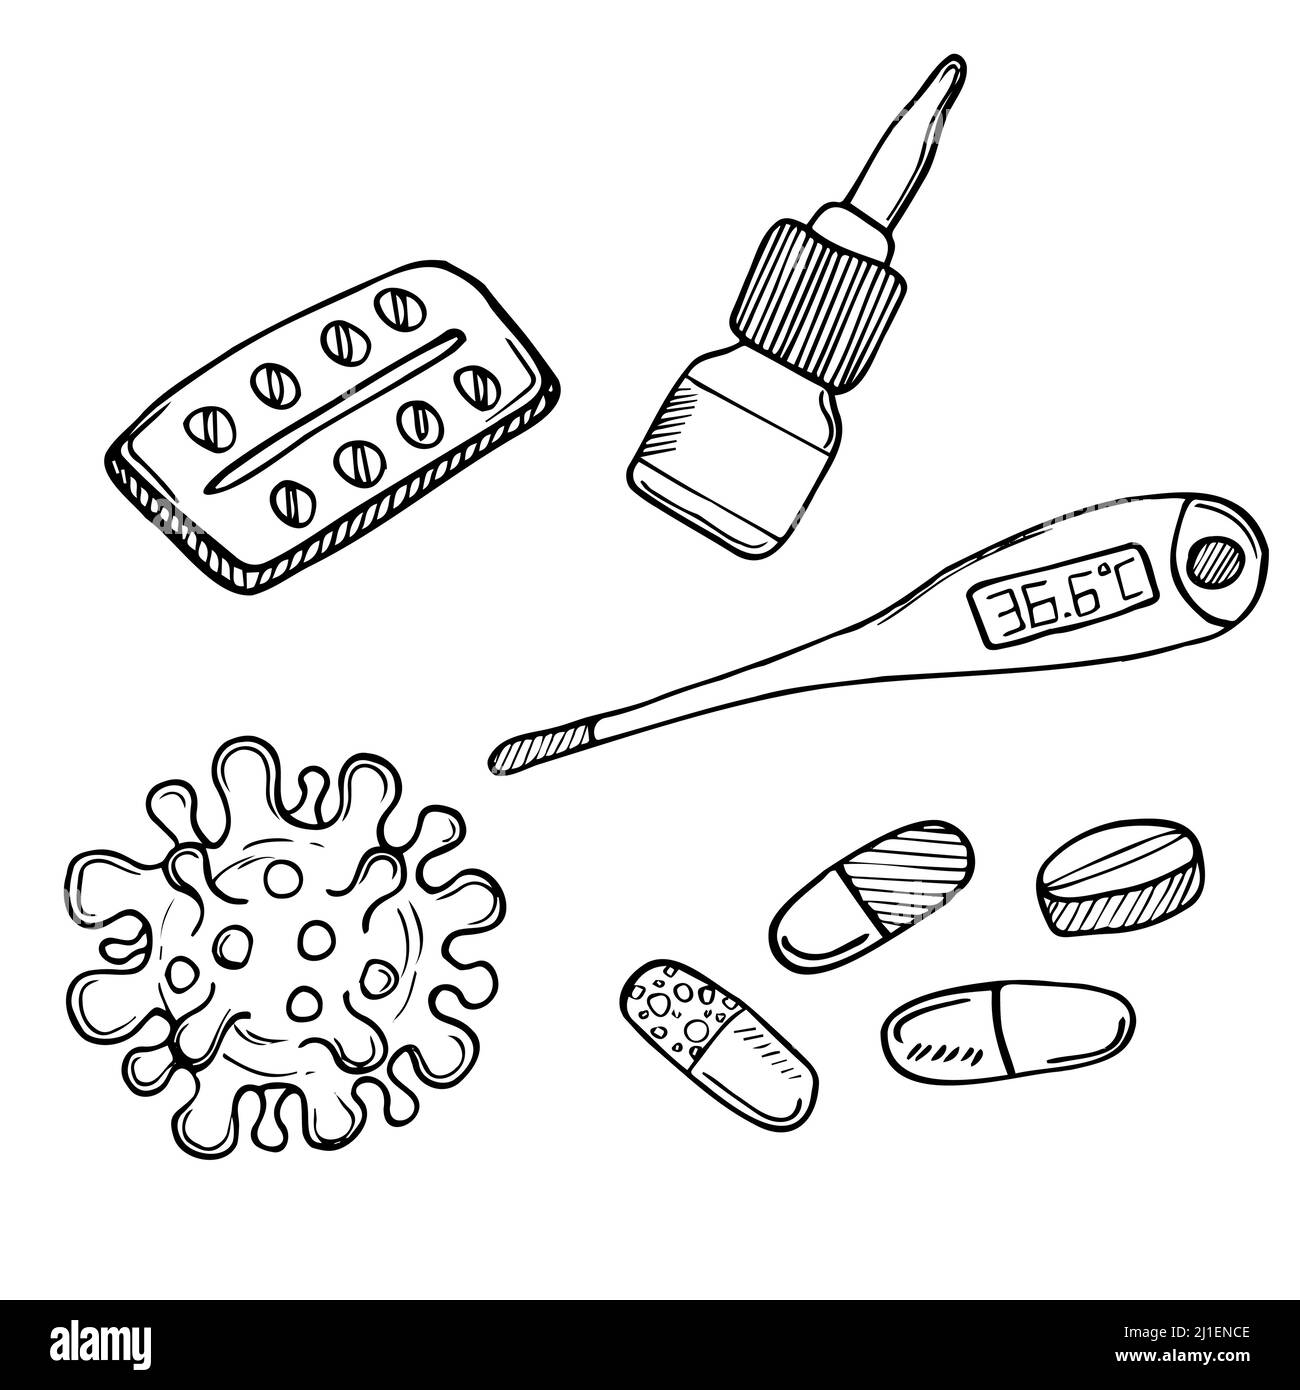 Flu doodle drawing collection. Elements such as medicine, thermometer, viruses, etc are included. Hand drawn vector doodle illustrations Stock Vector